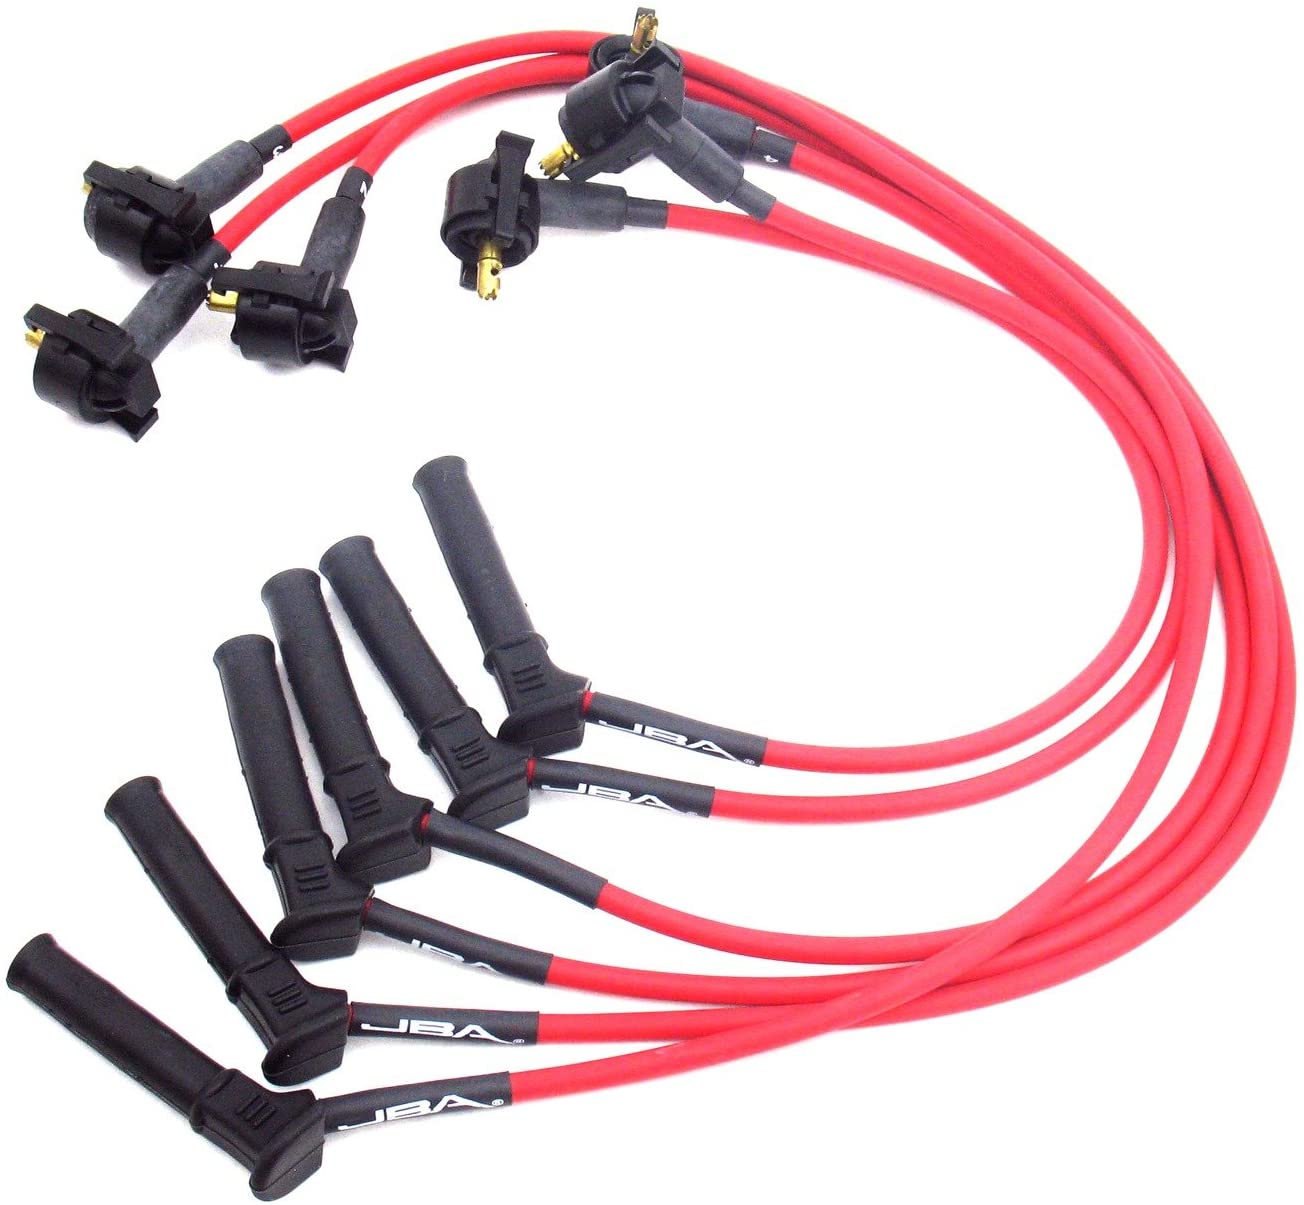 JBA W0675 Red Ignition Wire for Ranger05-10 Mustang 4.0L 01-05